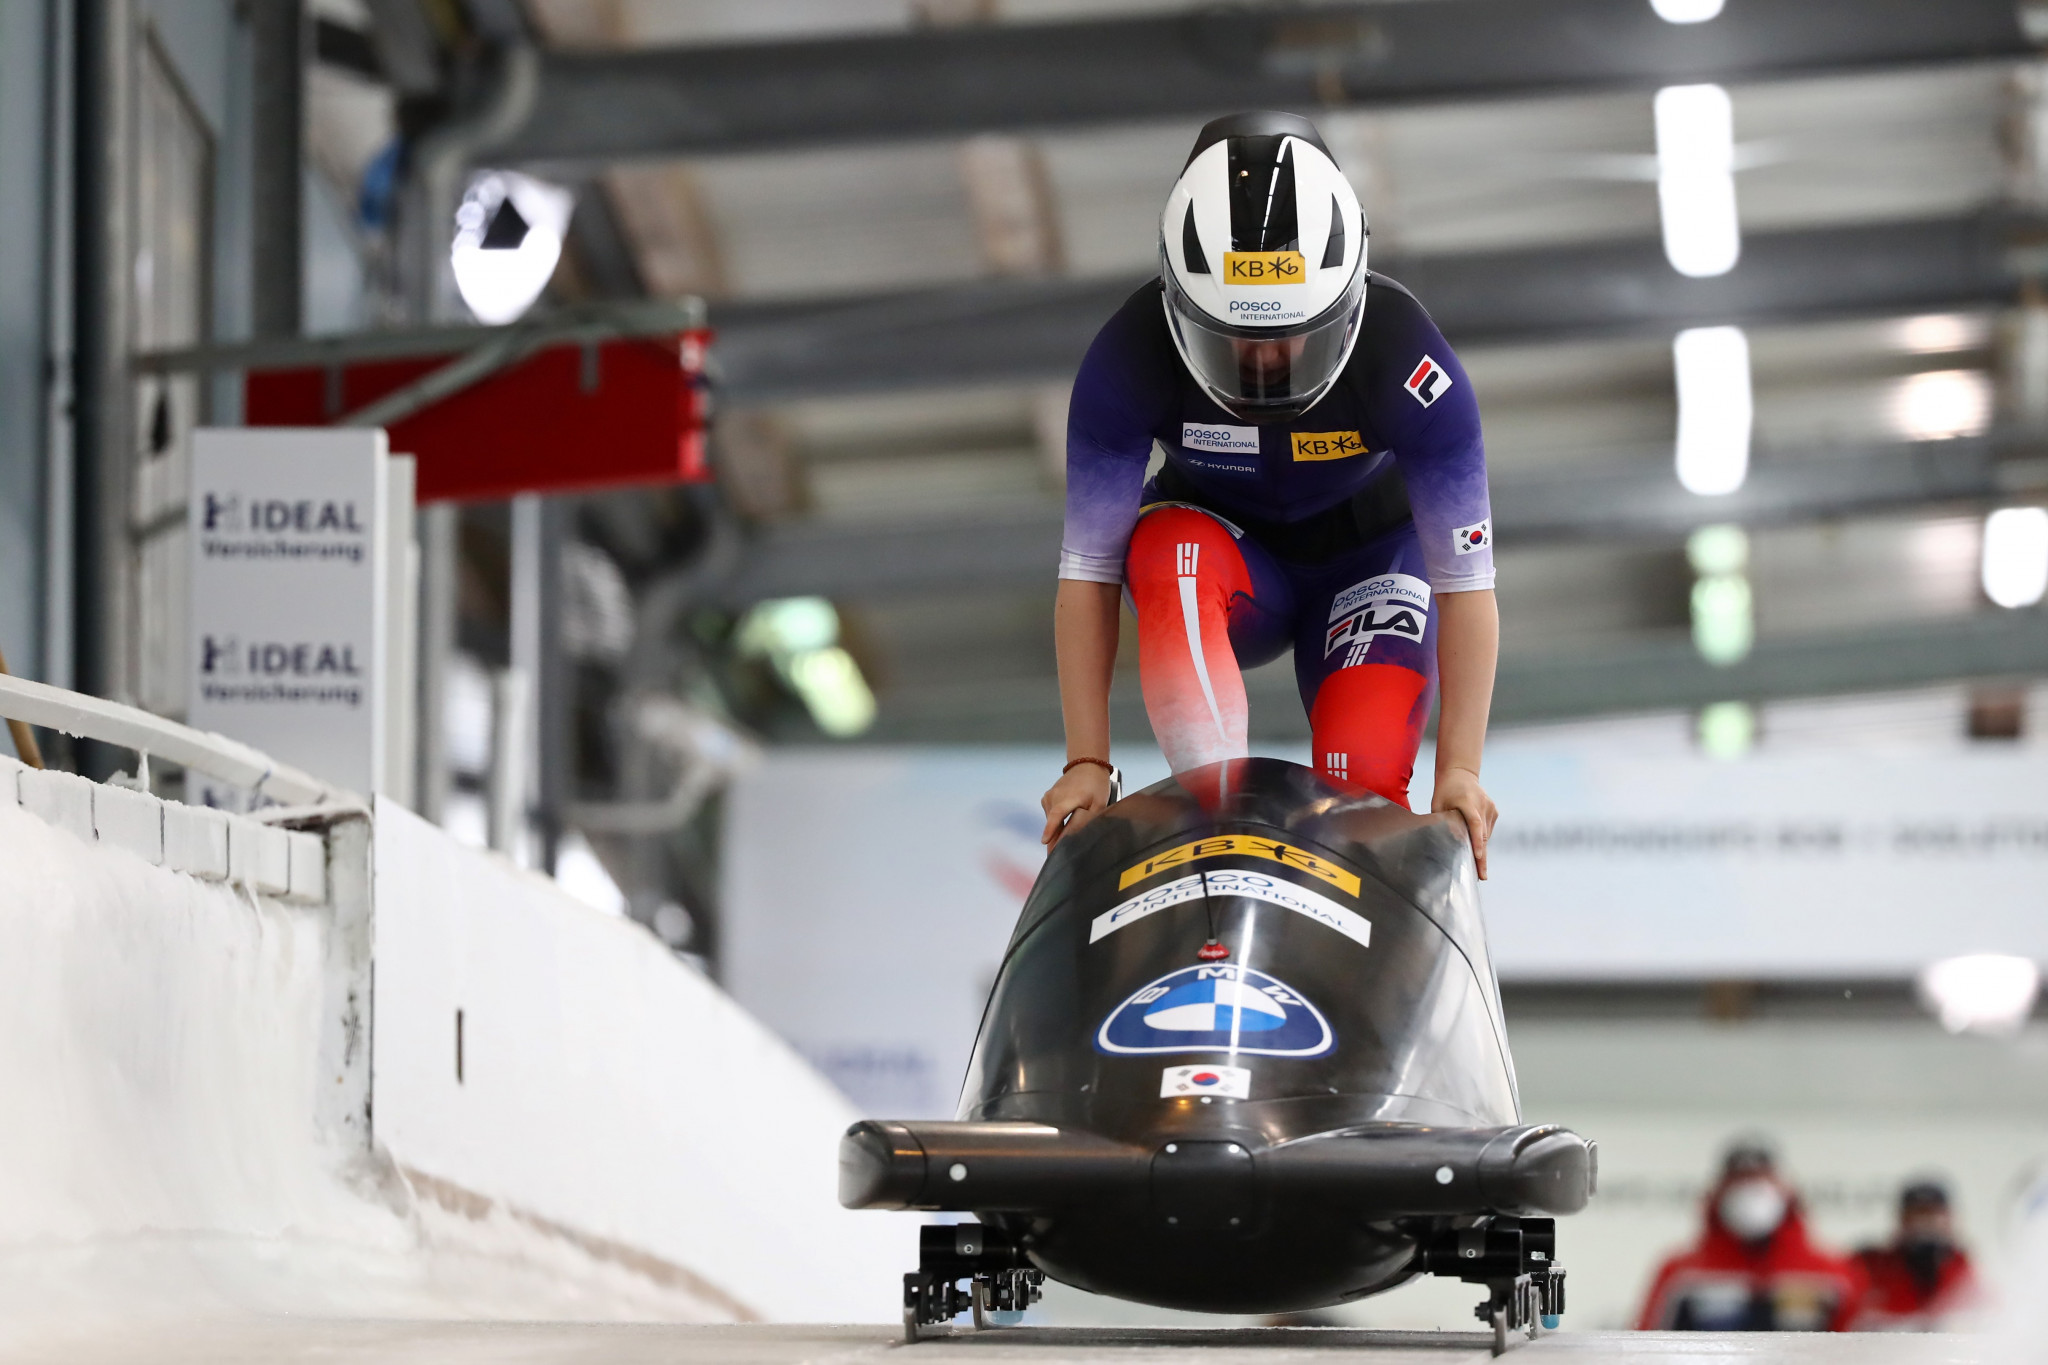 Kim Yoo-ran emerged victorious at the Women’s Monobob World Series event in Sigulda ©Getty Images